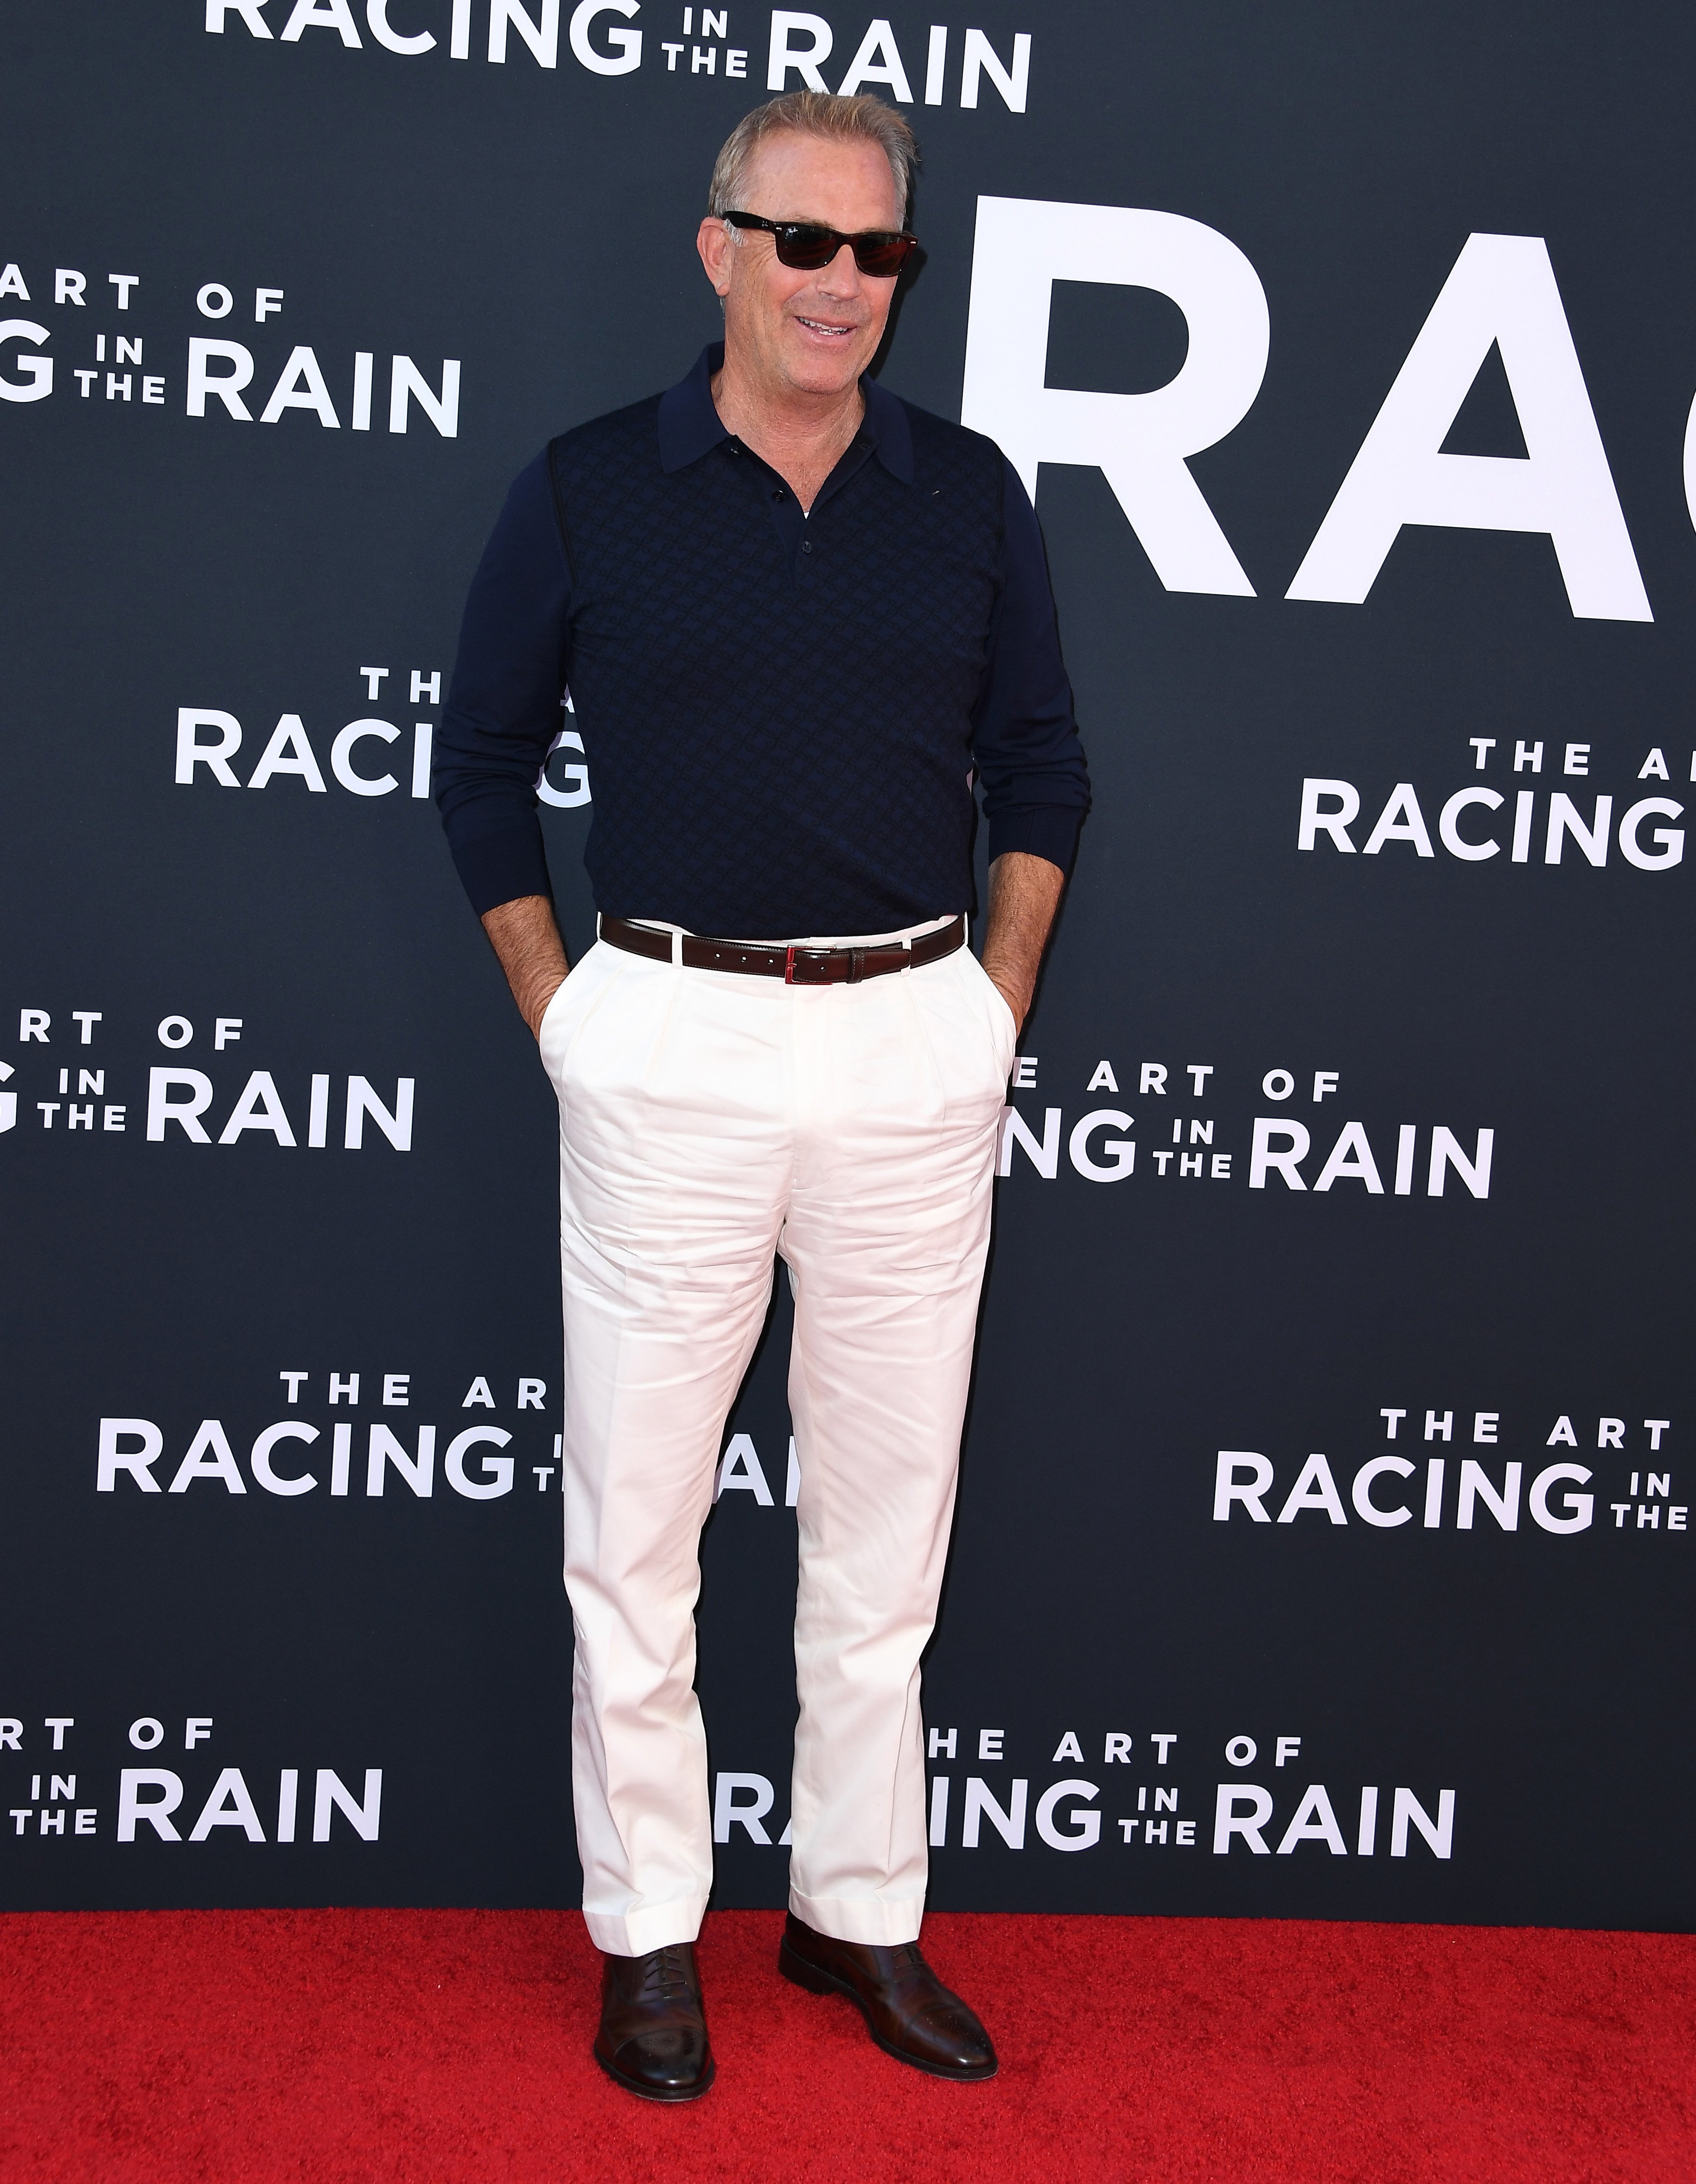 Kevin Costner from the "Yellowstone" at the Premiere Of 20th Century Fox's "The Art Of Racing In The Rain" at El Capitan Theatre on August 01, 2019 in Los Angeles, California. | Source: Getty Images